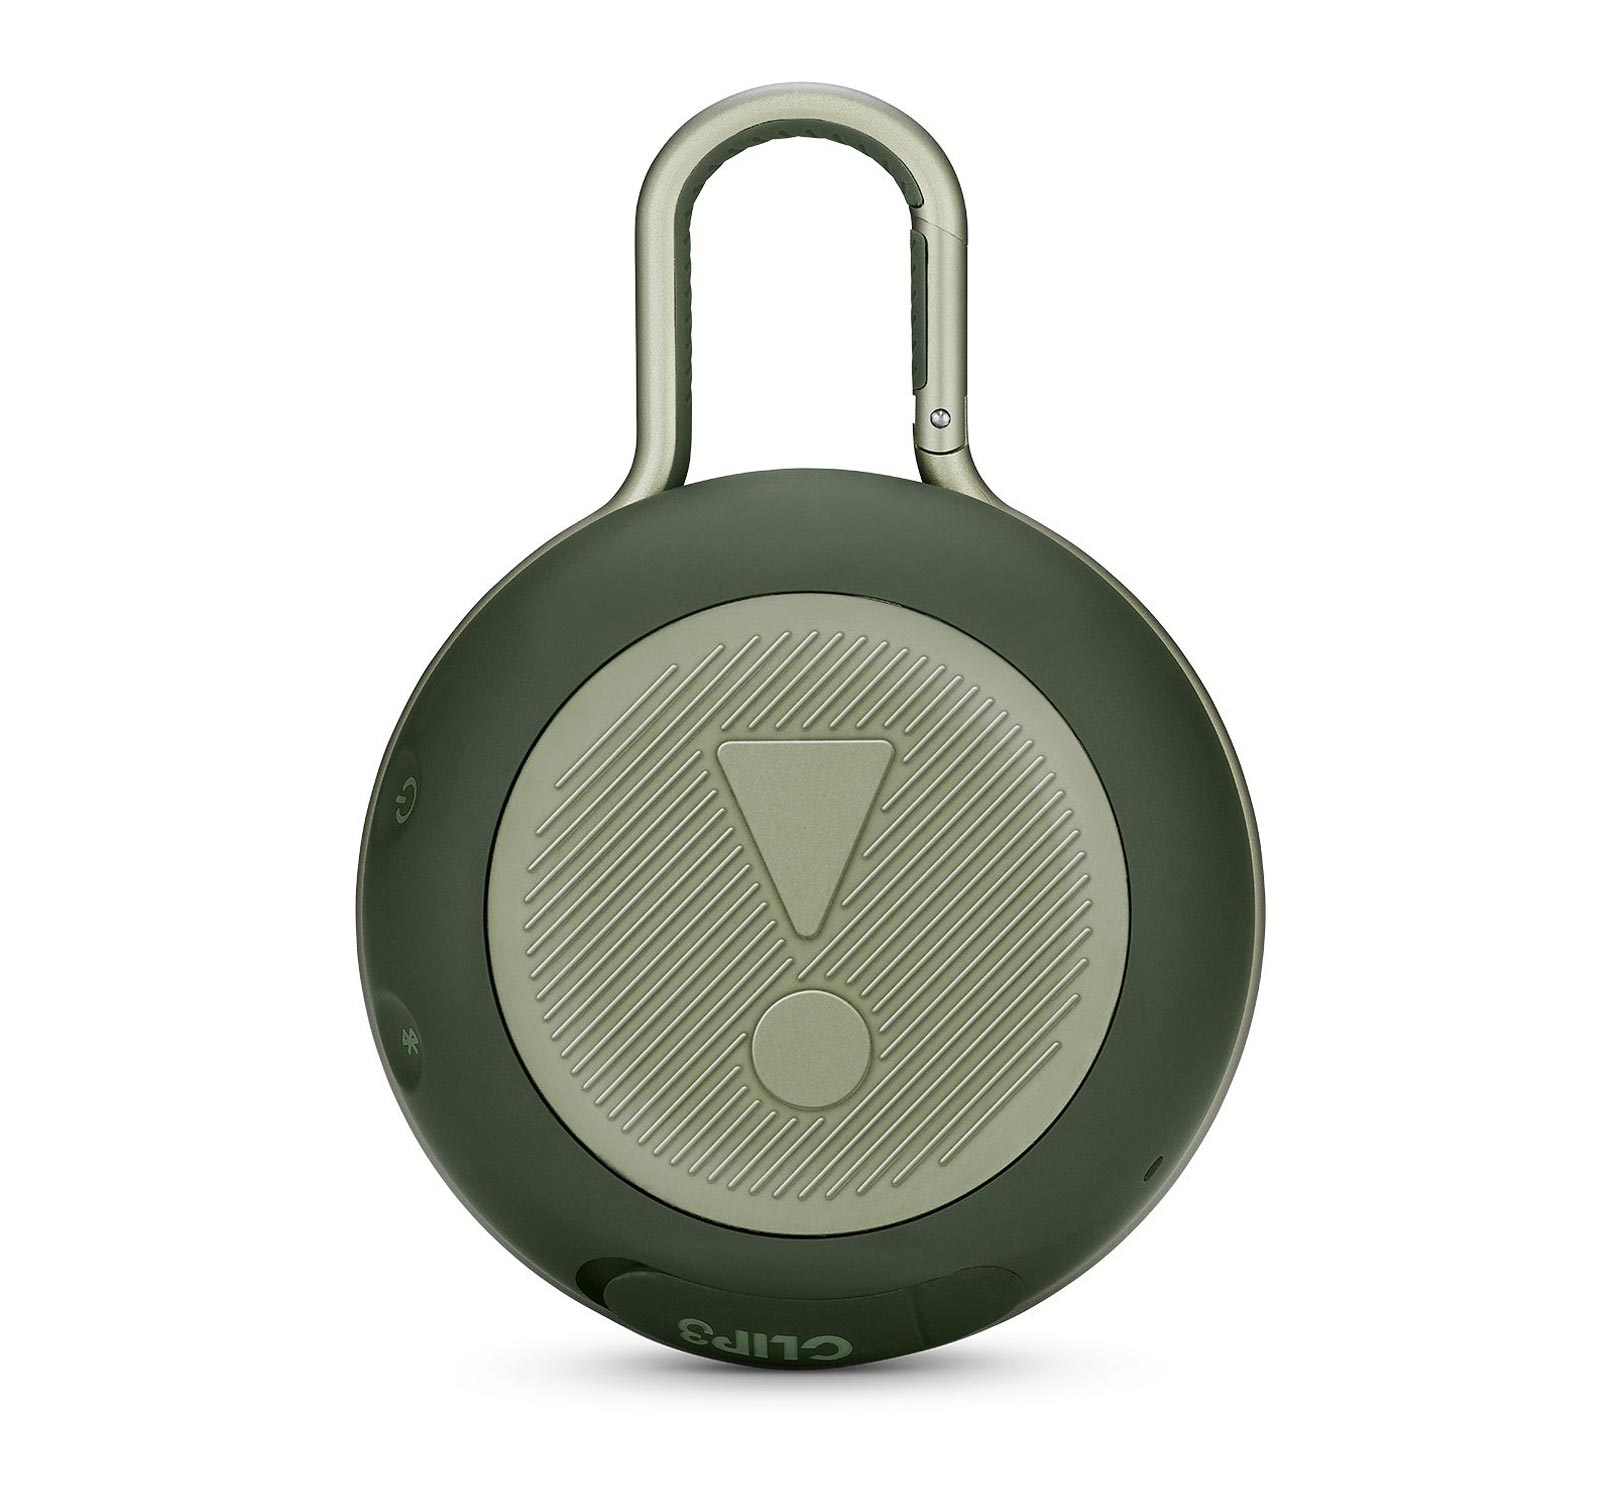 JBL Clip 3 Portable Bluetooth Speaker with Carabiner - Green - image 3 of 4